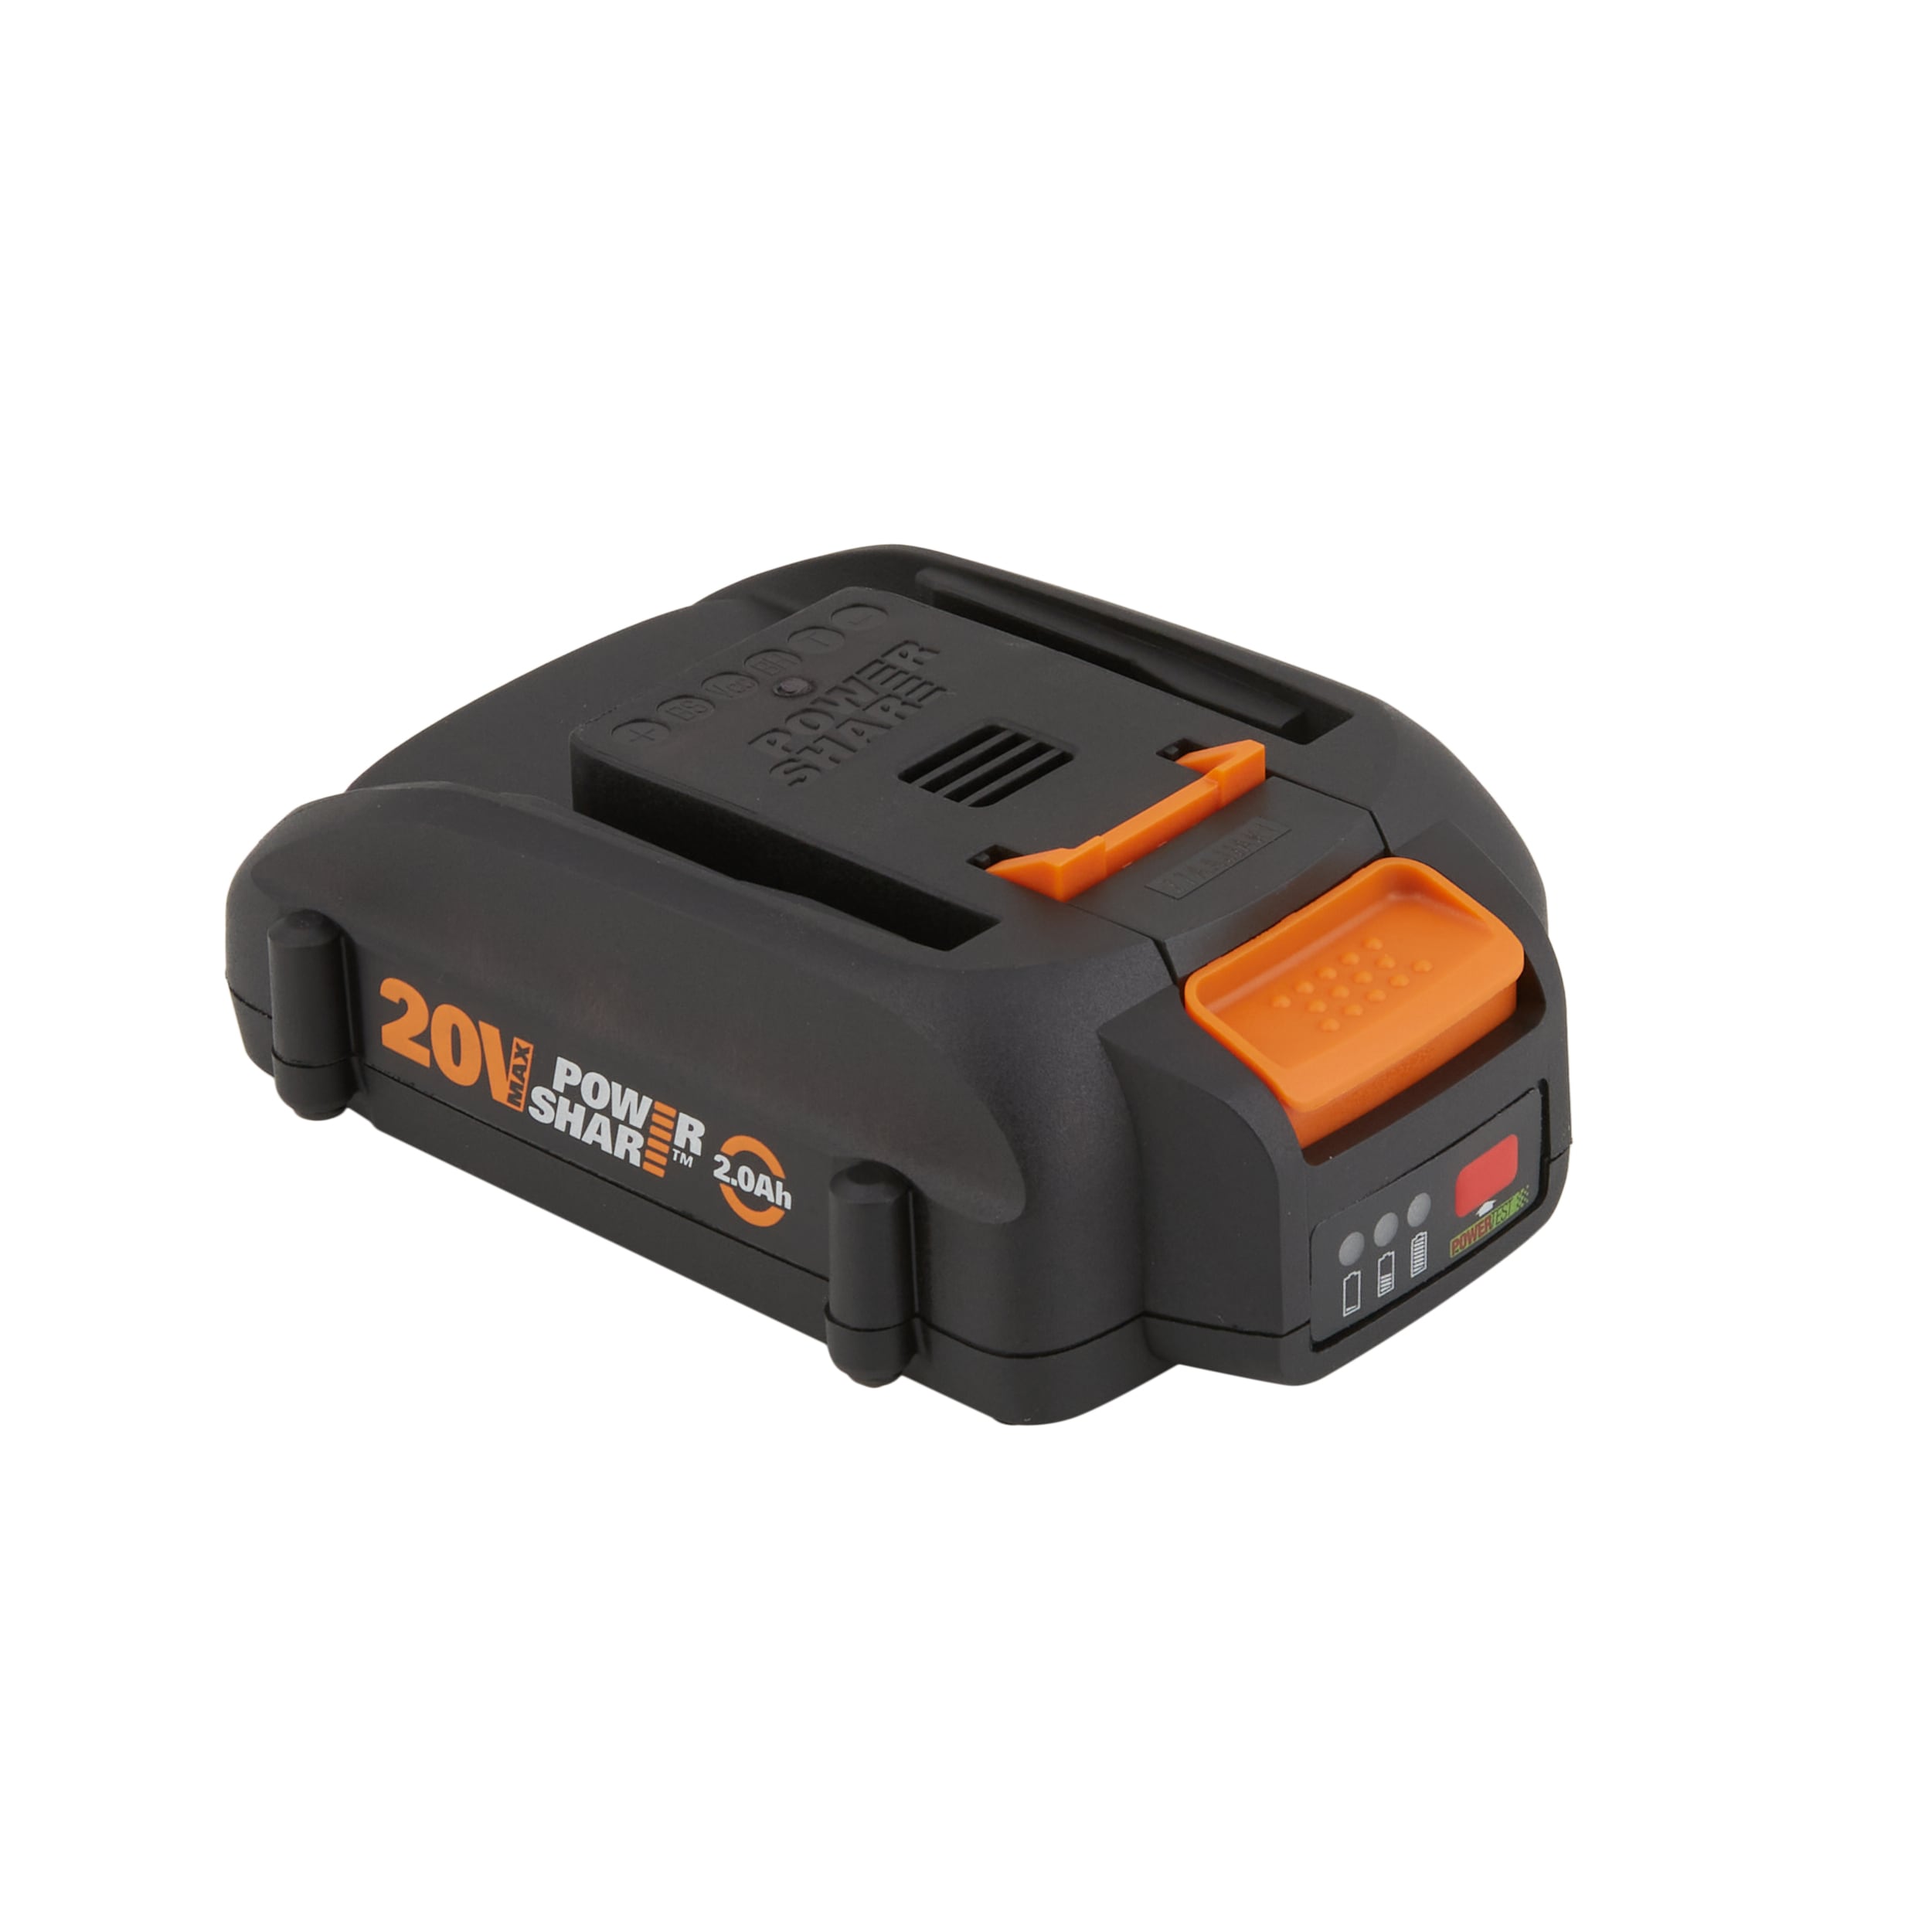 WORX 20-V 8 Amp-Hour; Lithium-ion Battery at